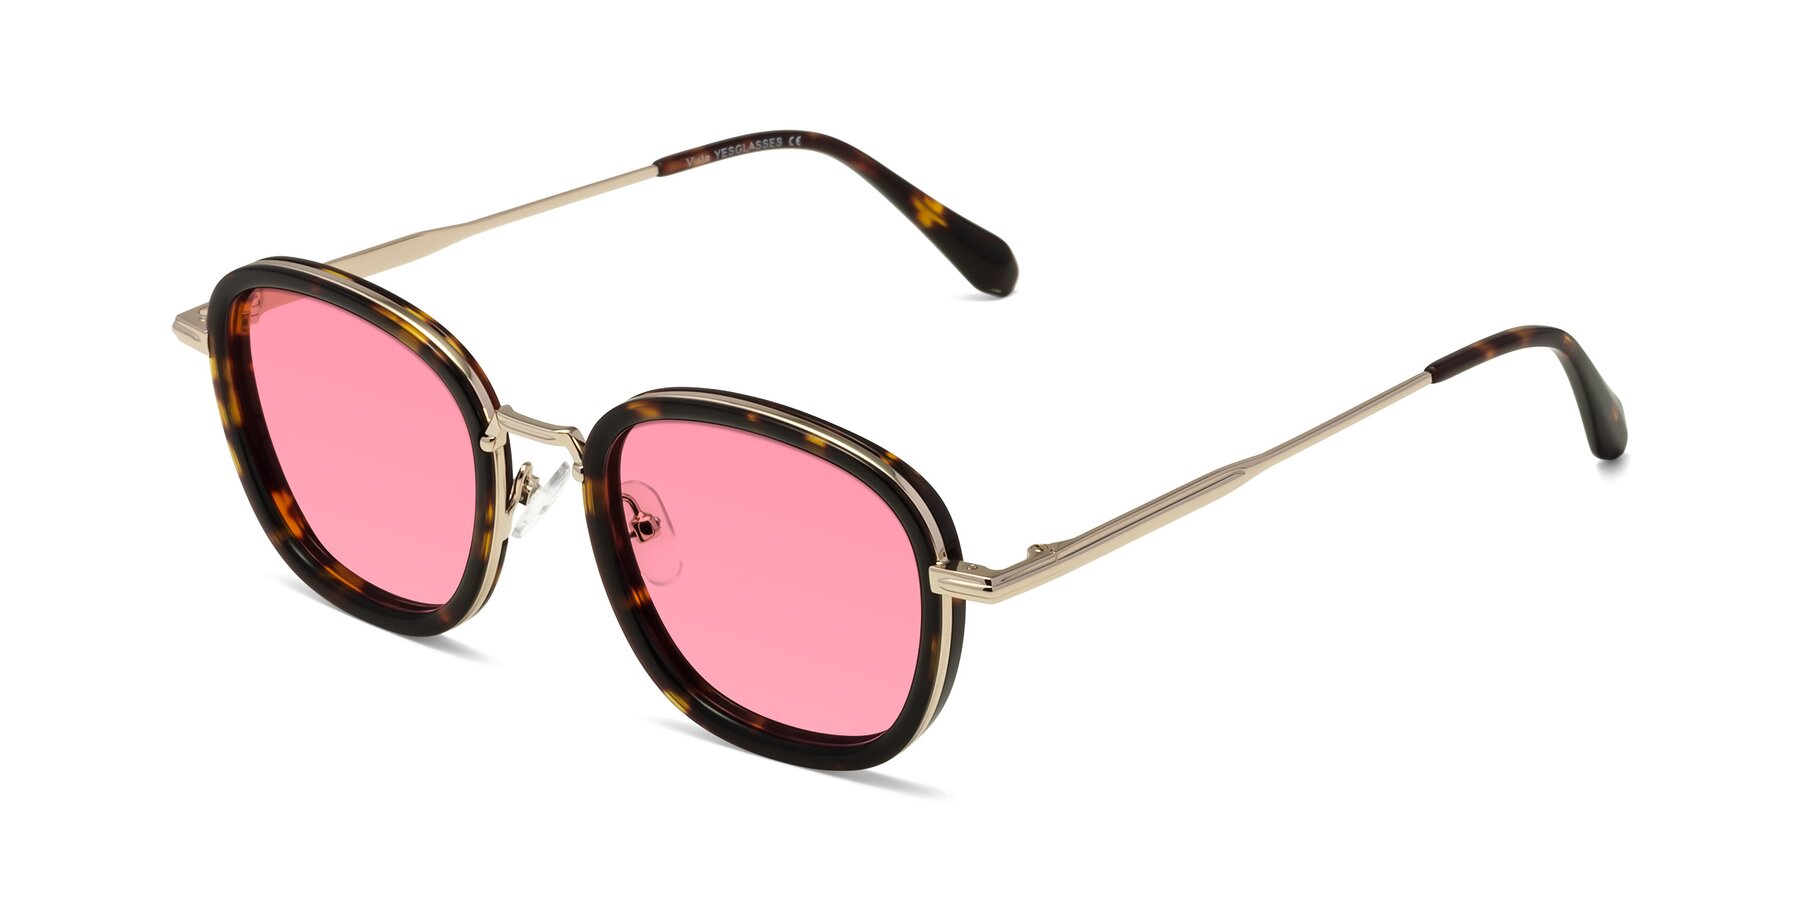 Angle of Vista in Tortoise-Light Gold with Pink Tinted Lenses